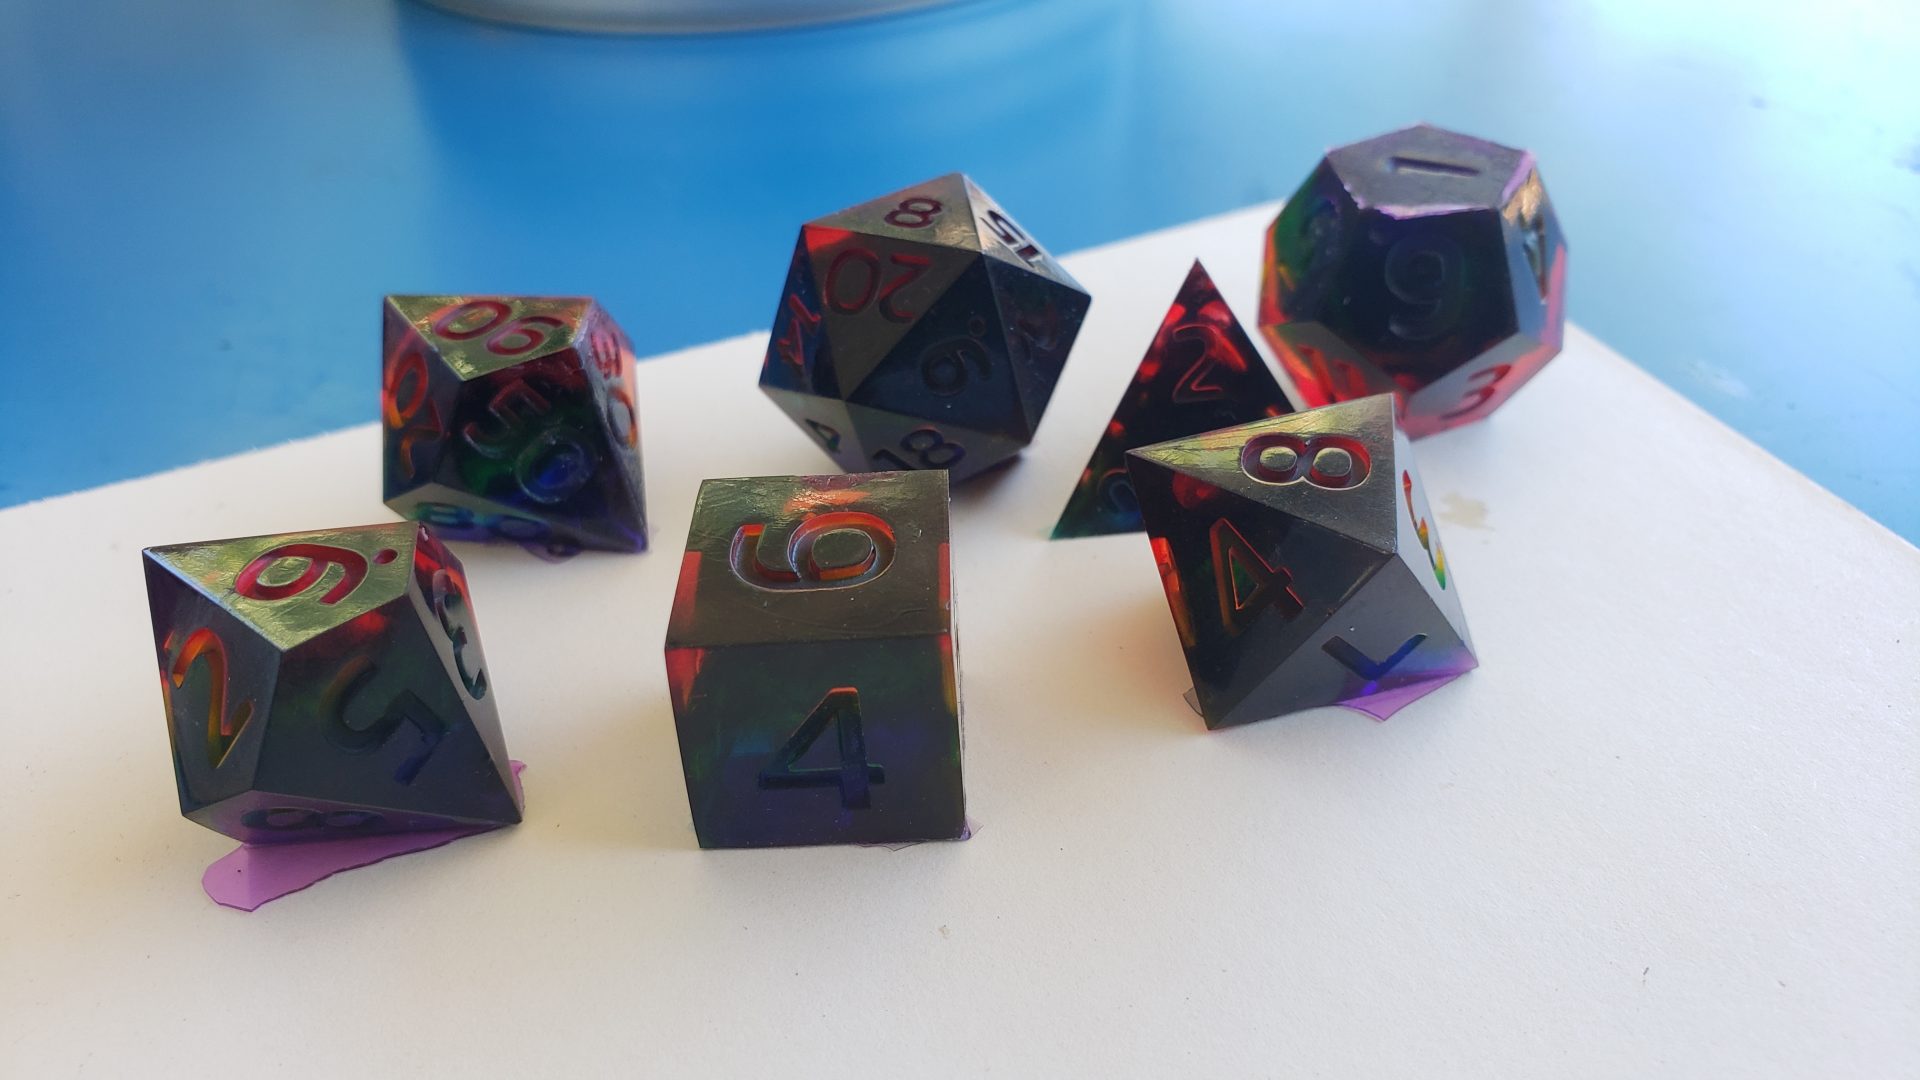 A picture of several dice (or die) lay out on a tabletop